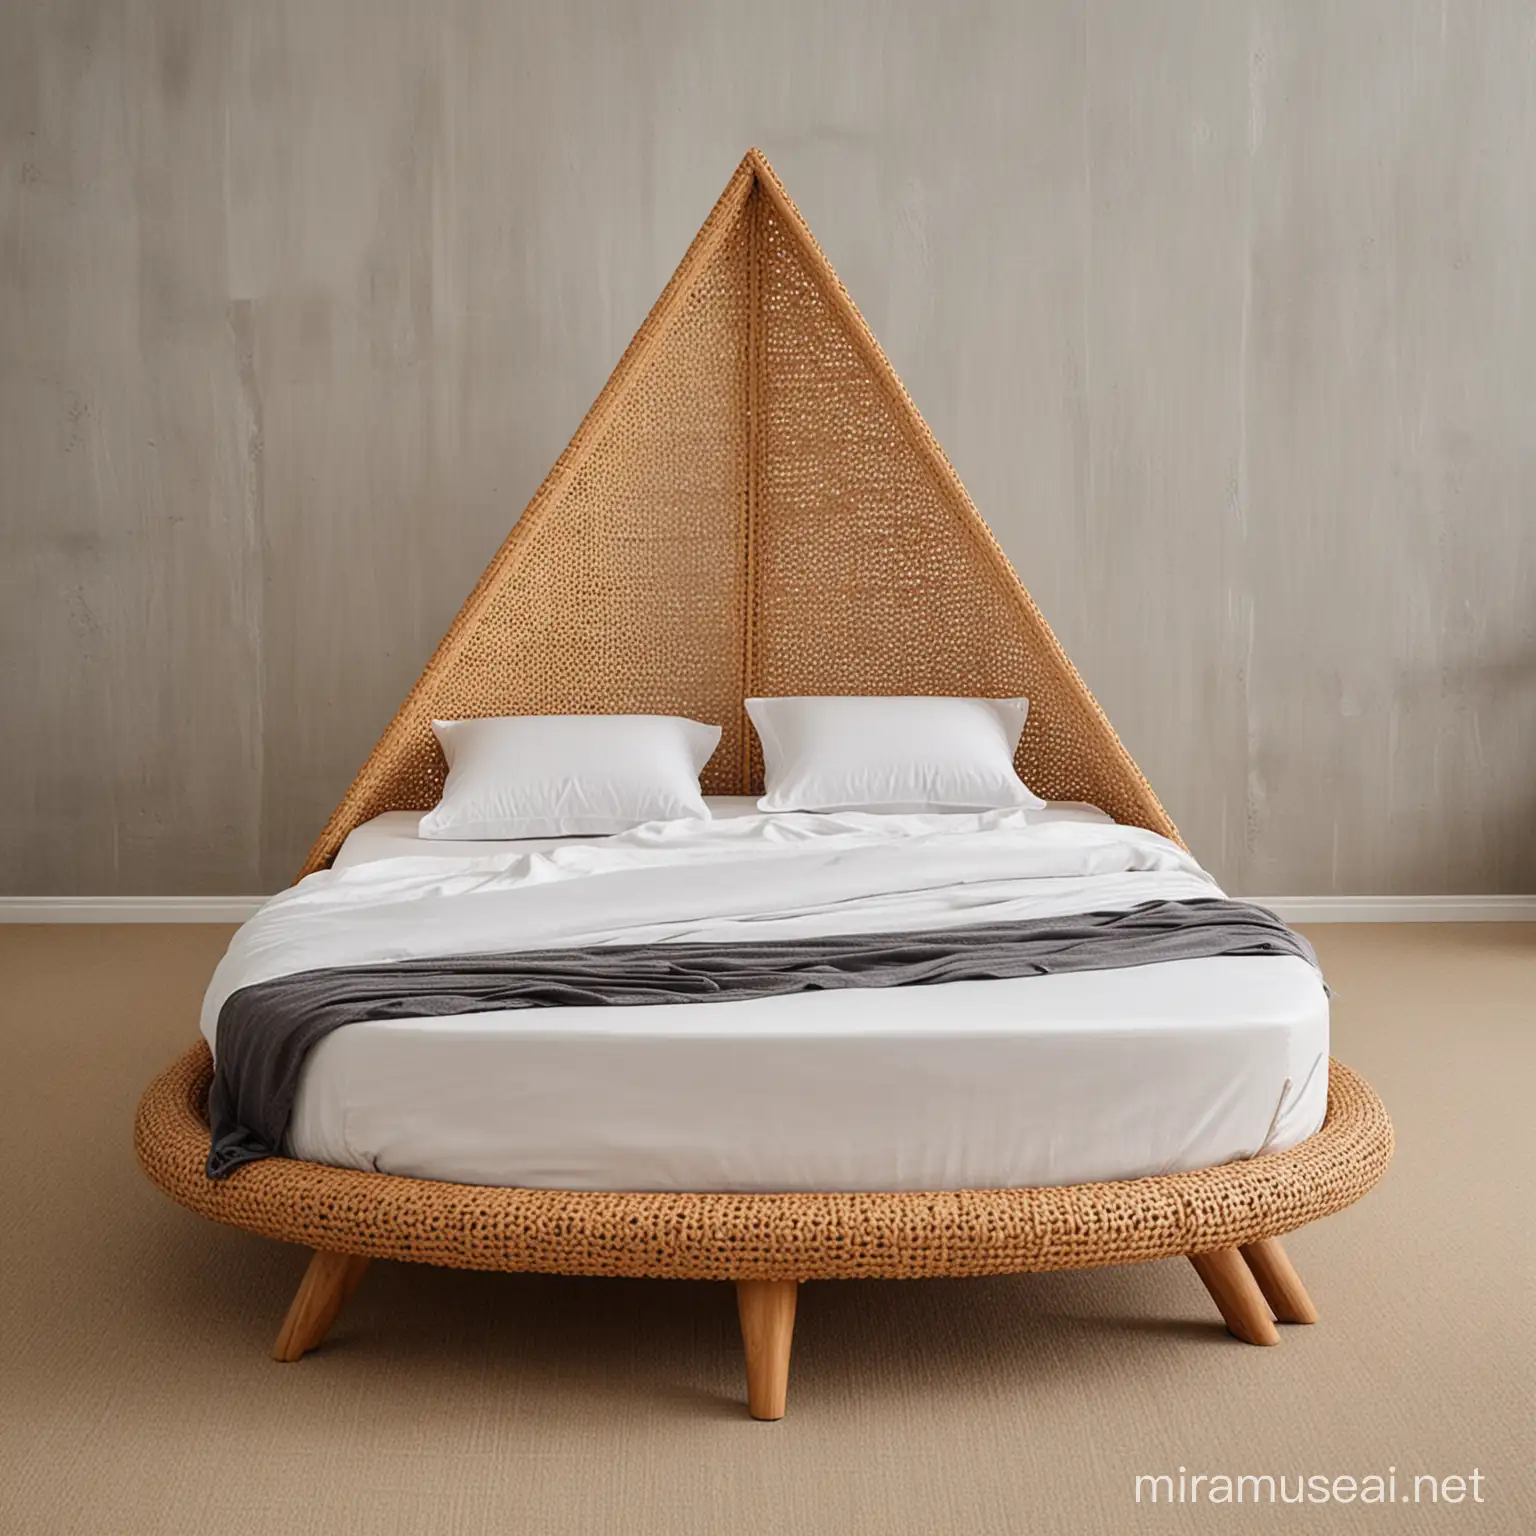 Modern Single Bed with Rattan and Wood Material in Unique Triangle Shape